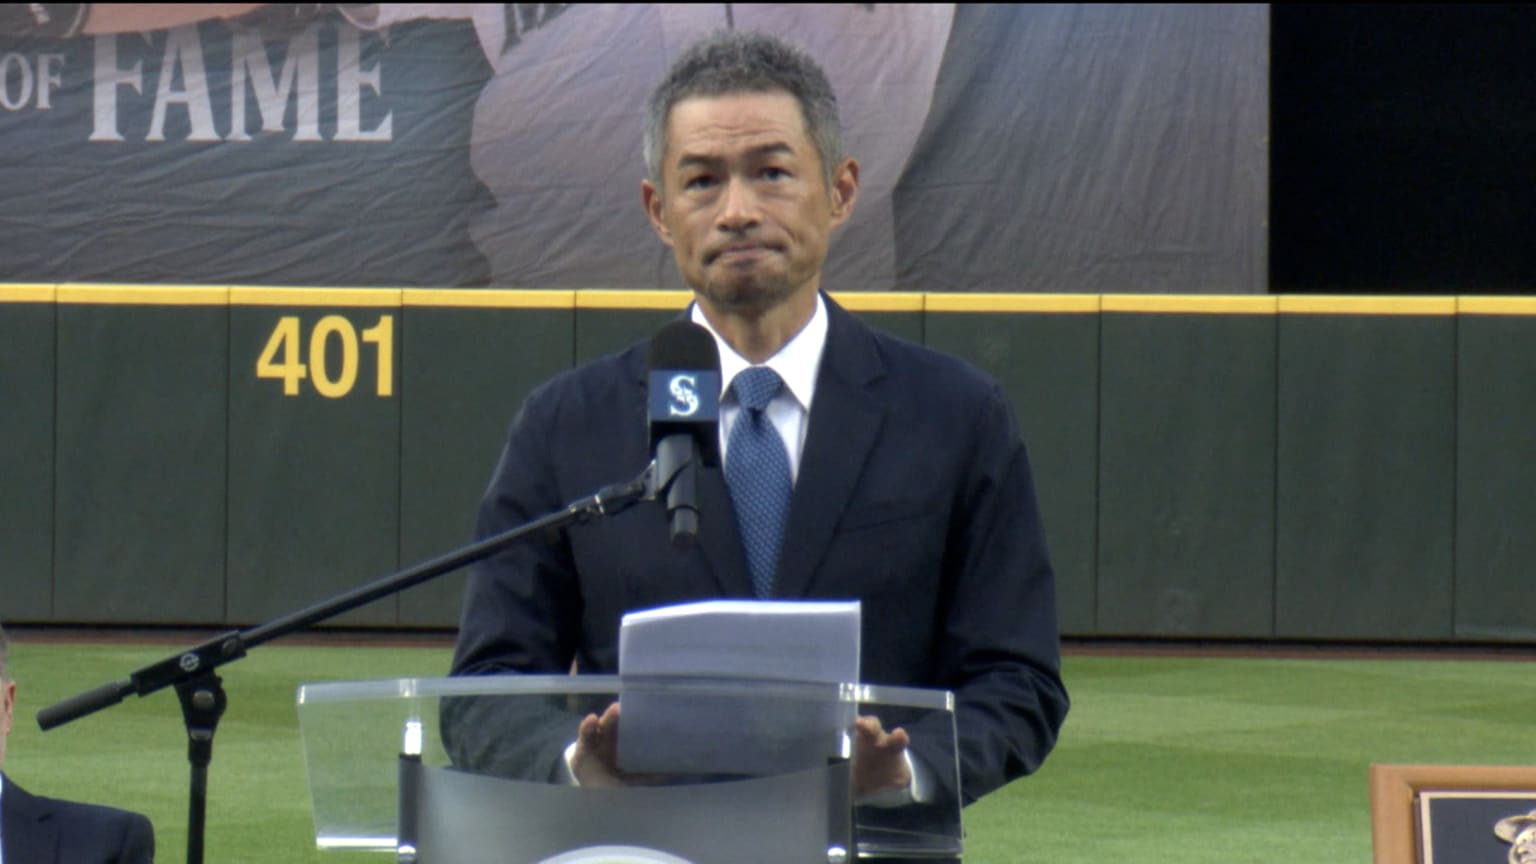 Baseball: Ichiro to be inducted into Mariners Hall of Fame